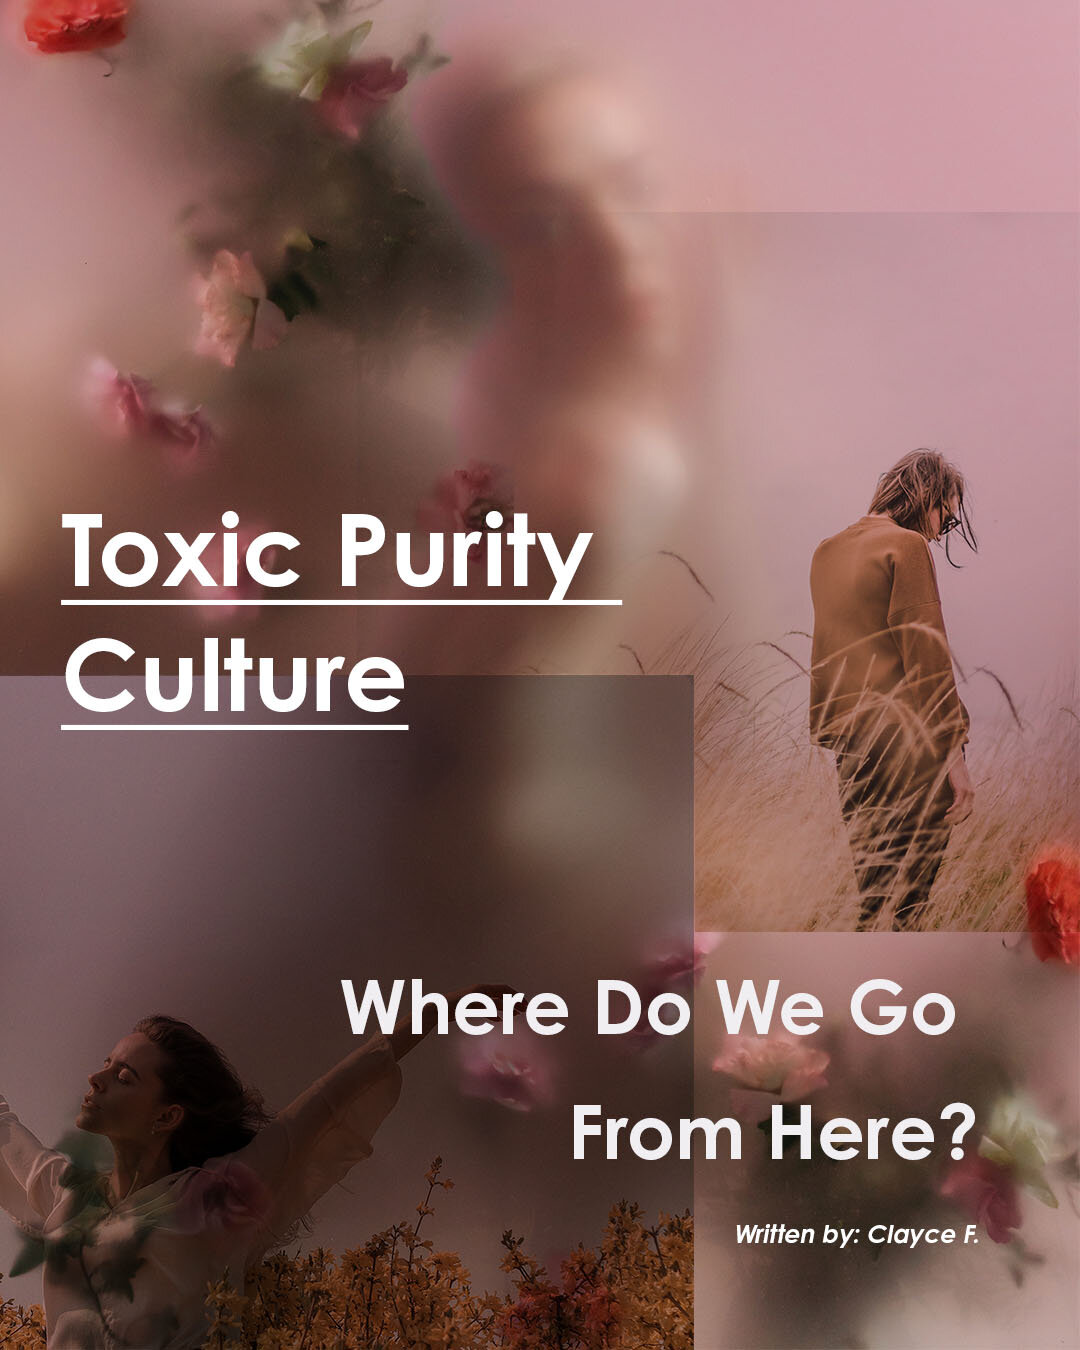 Toxic Purity Culture Where Do We Go From Here? — Be In Not Of